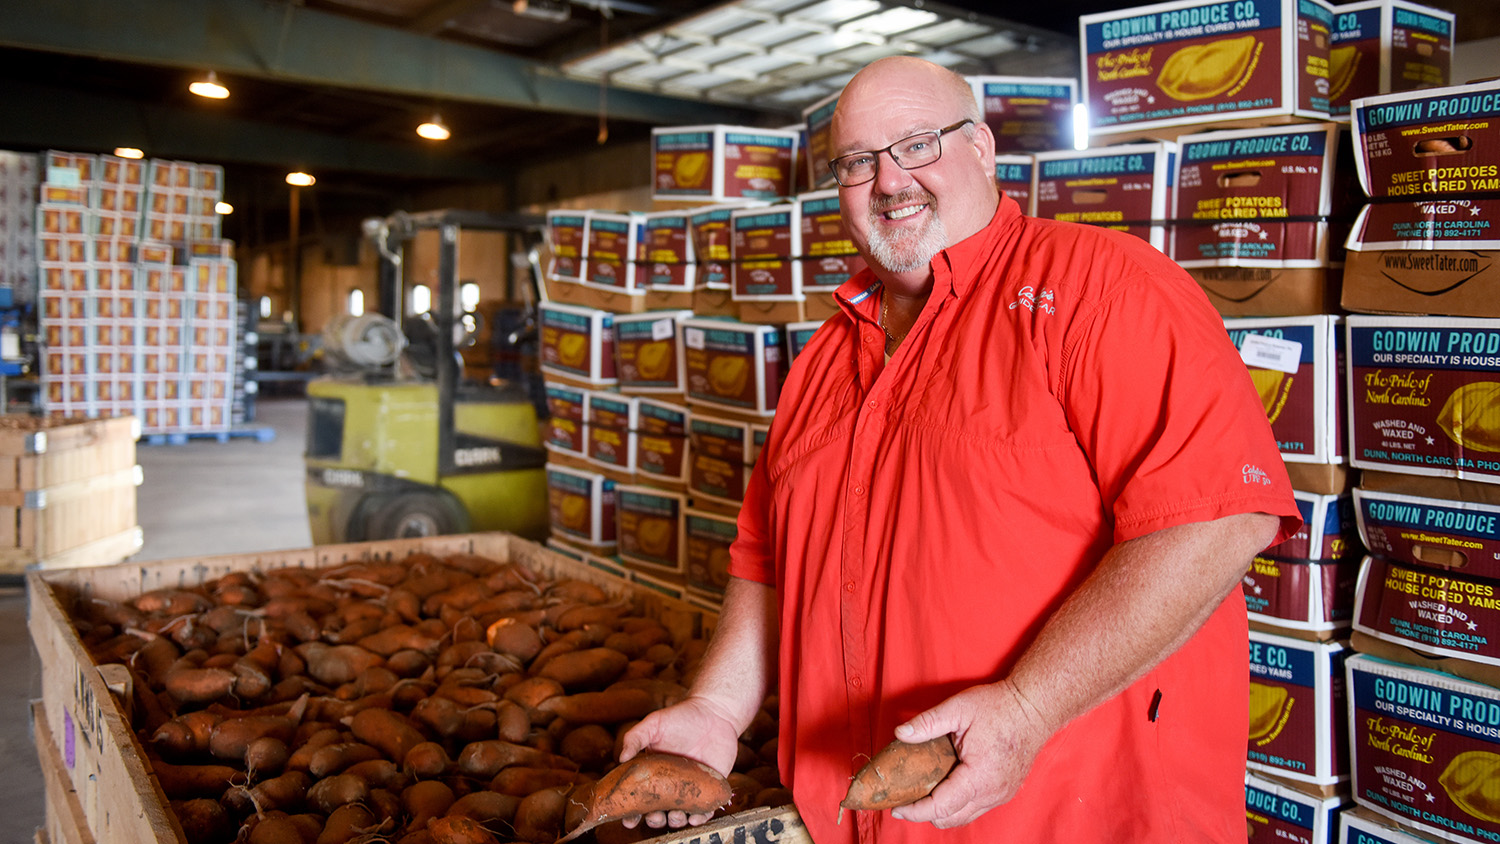 David L. Godwin is another third-generation sweet potato farmer and owner of Godwin Produce Co. in Dunn.